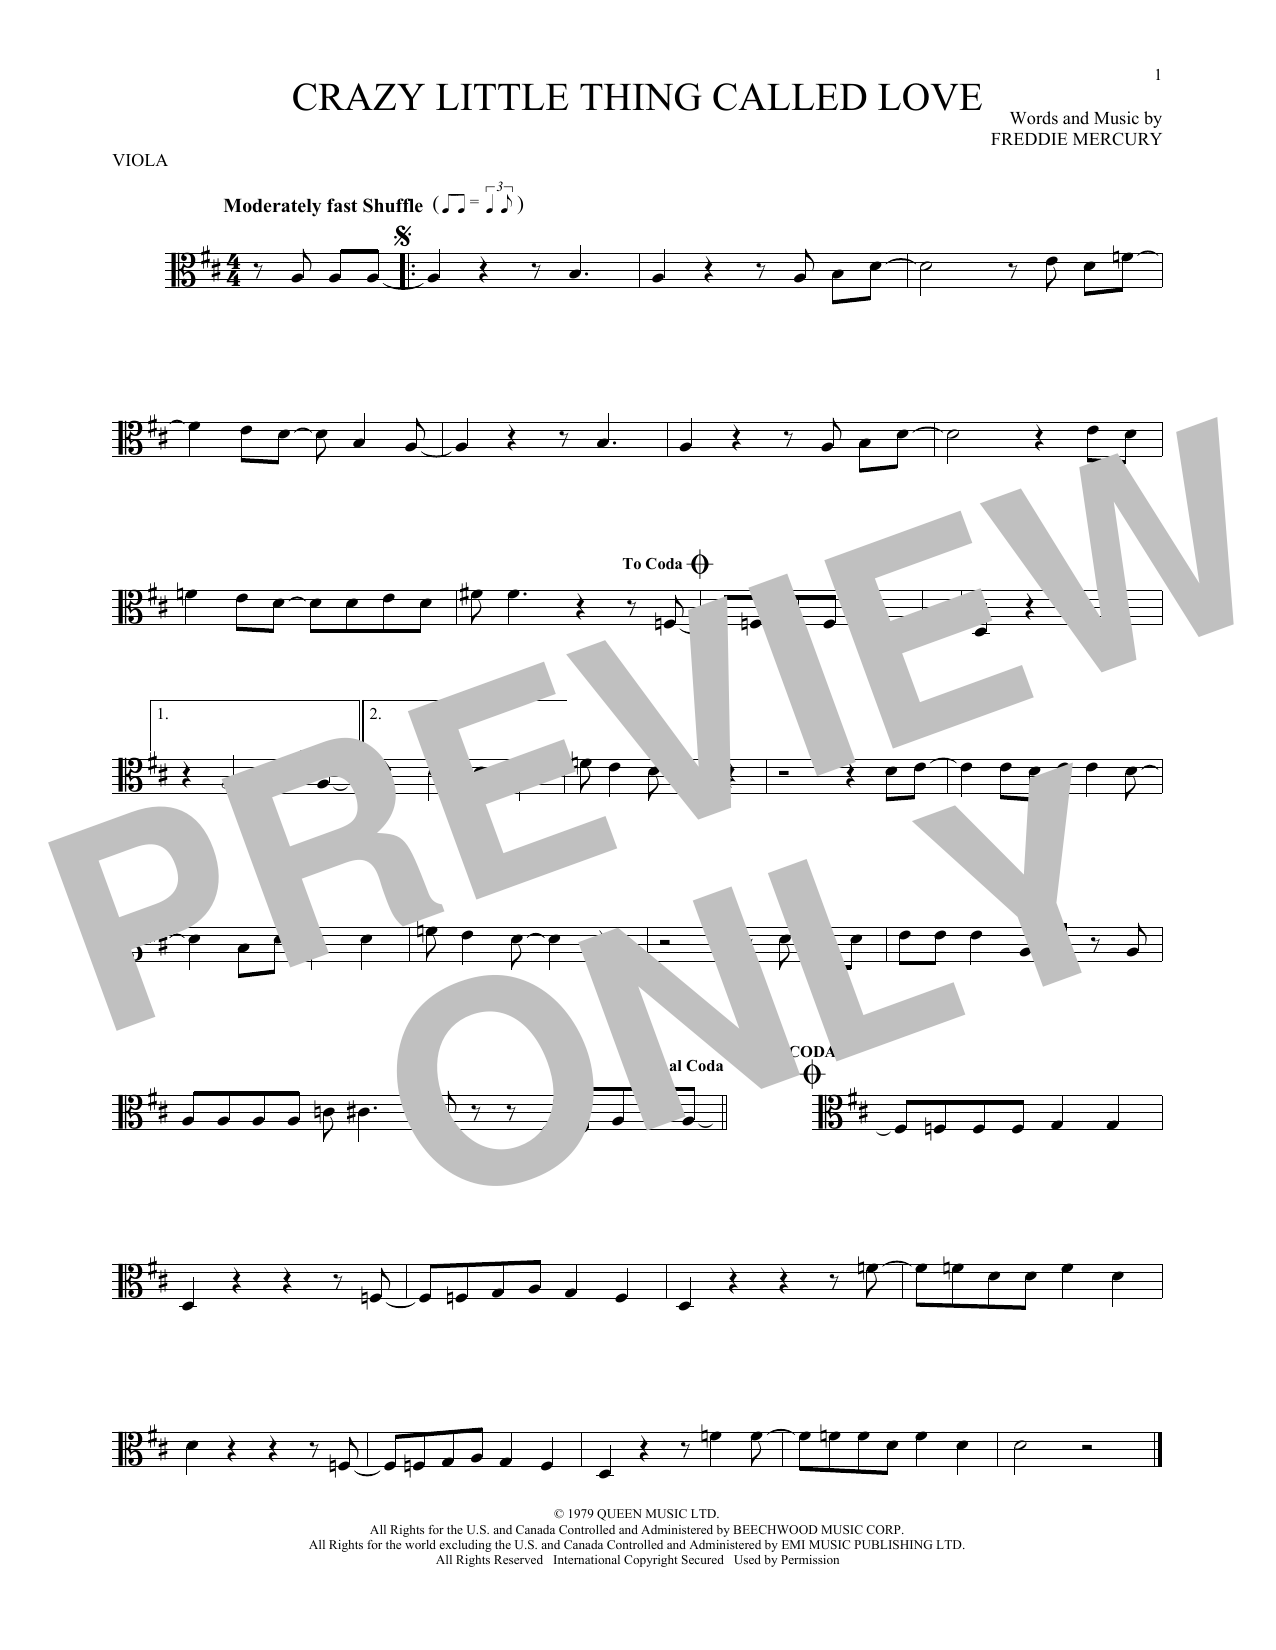 Download Queen Crazy Little Thing Called Love Sheet Music